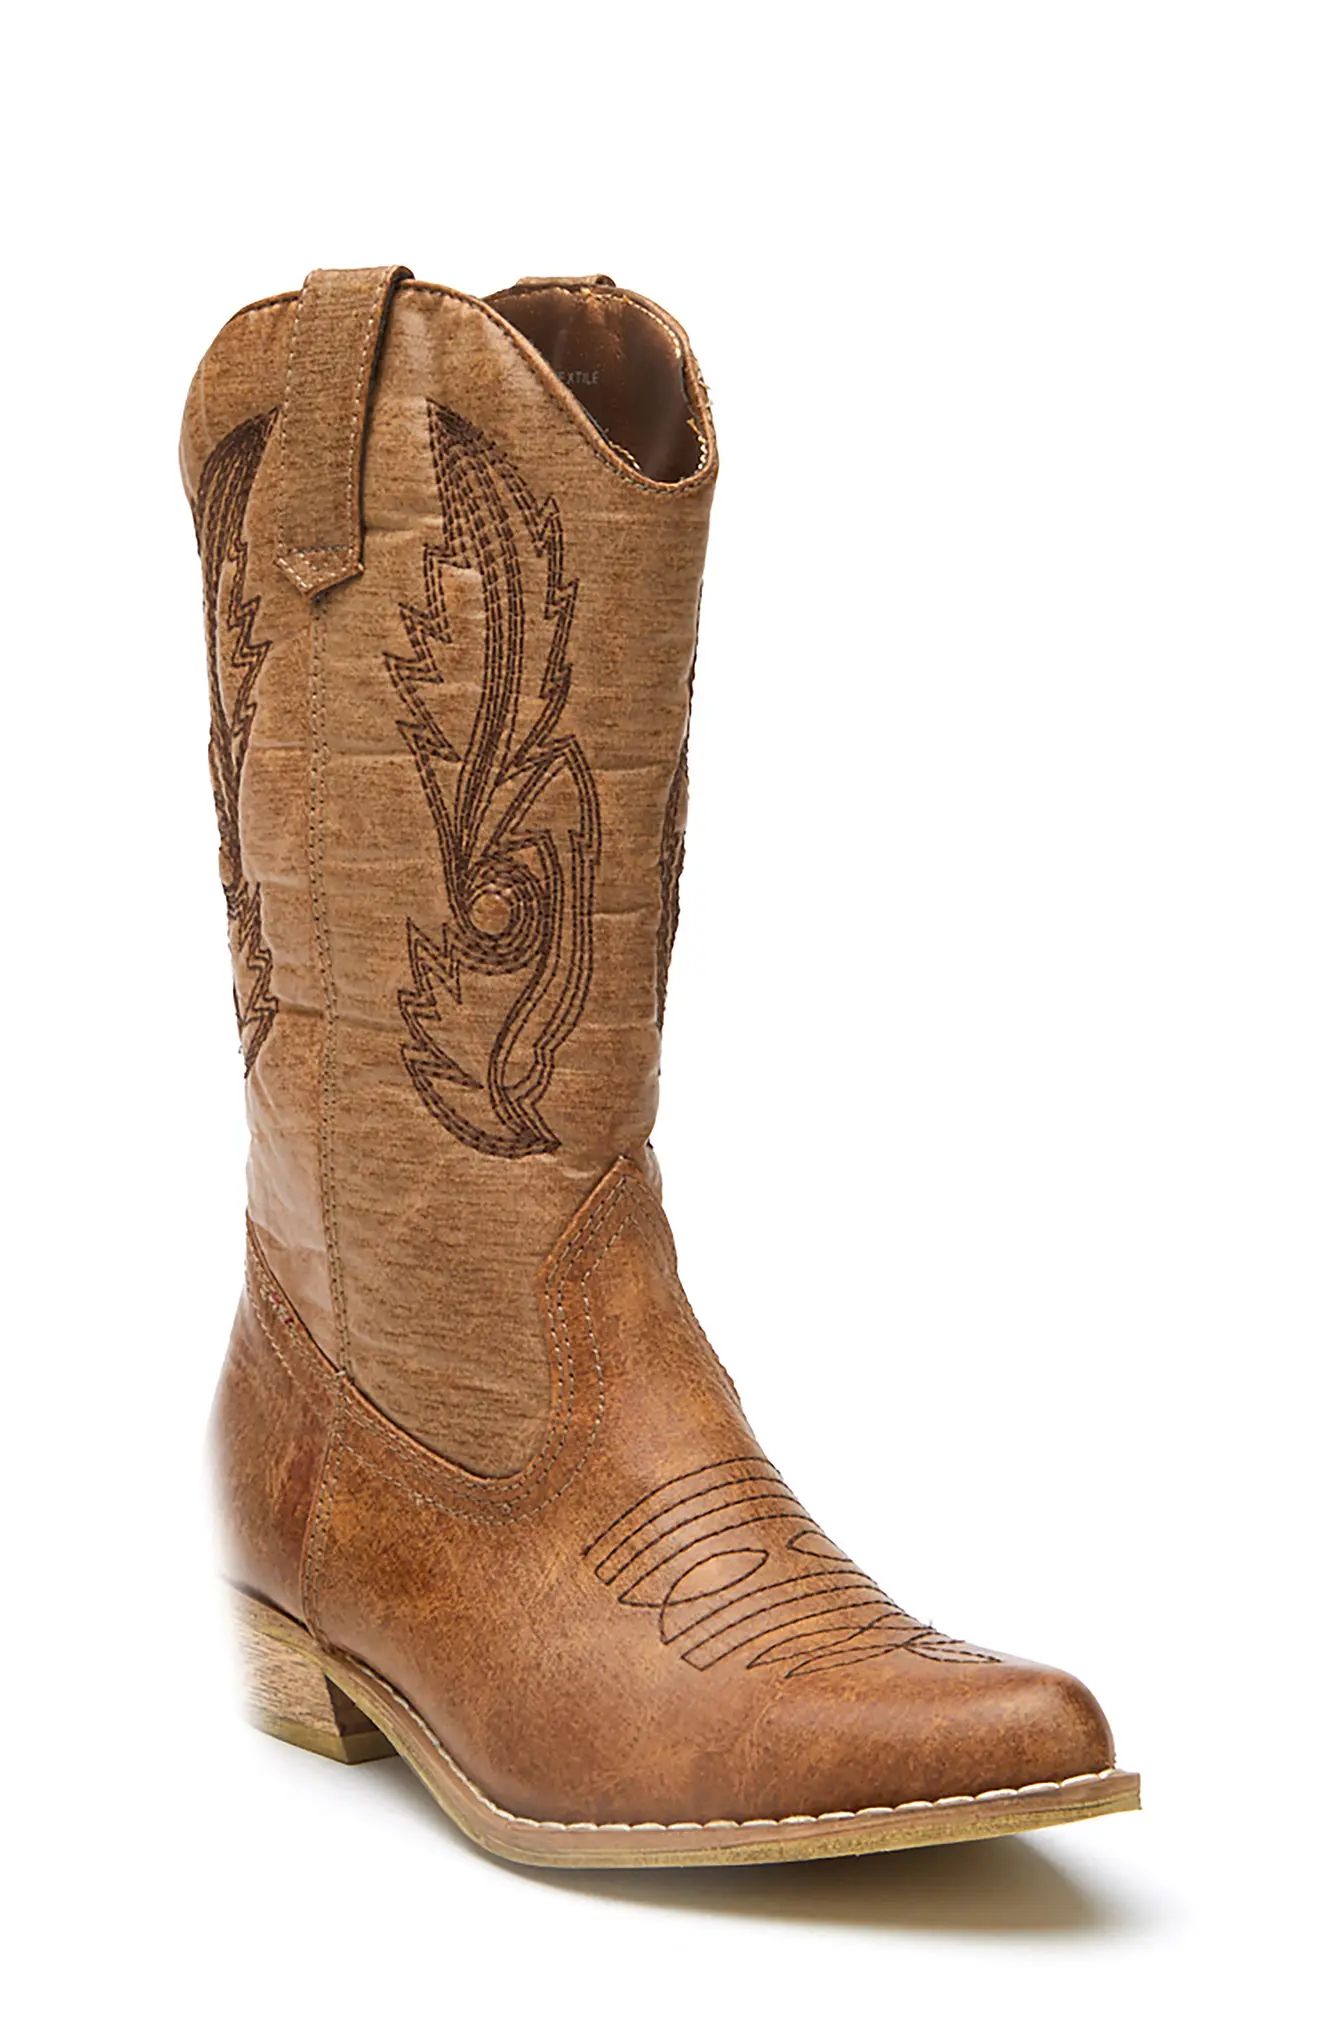 Girl's Coconuts By Matisse Western Boot, Size 2 M - Brown | Nordstrom